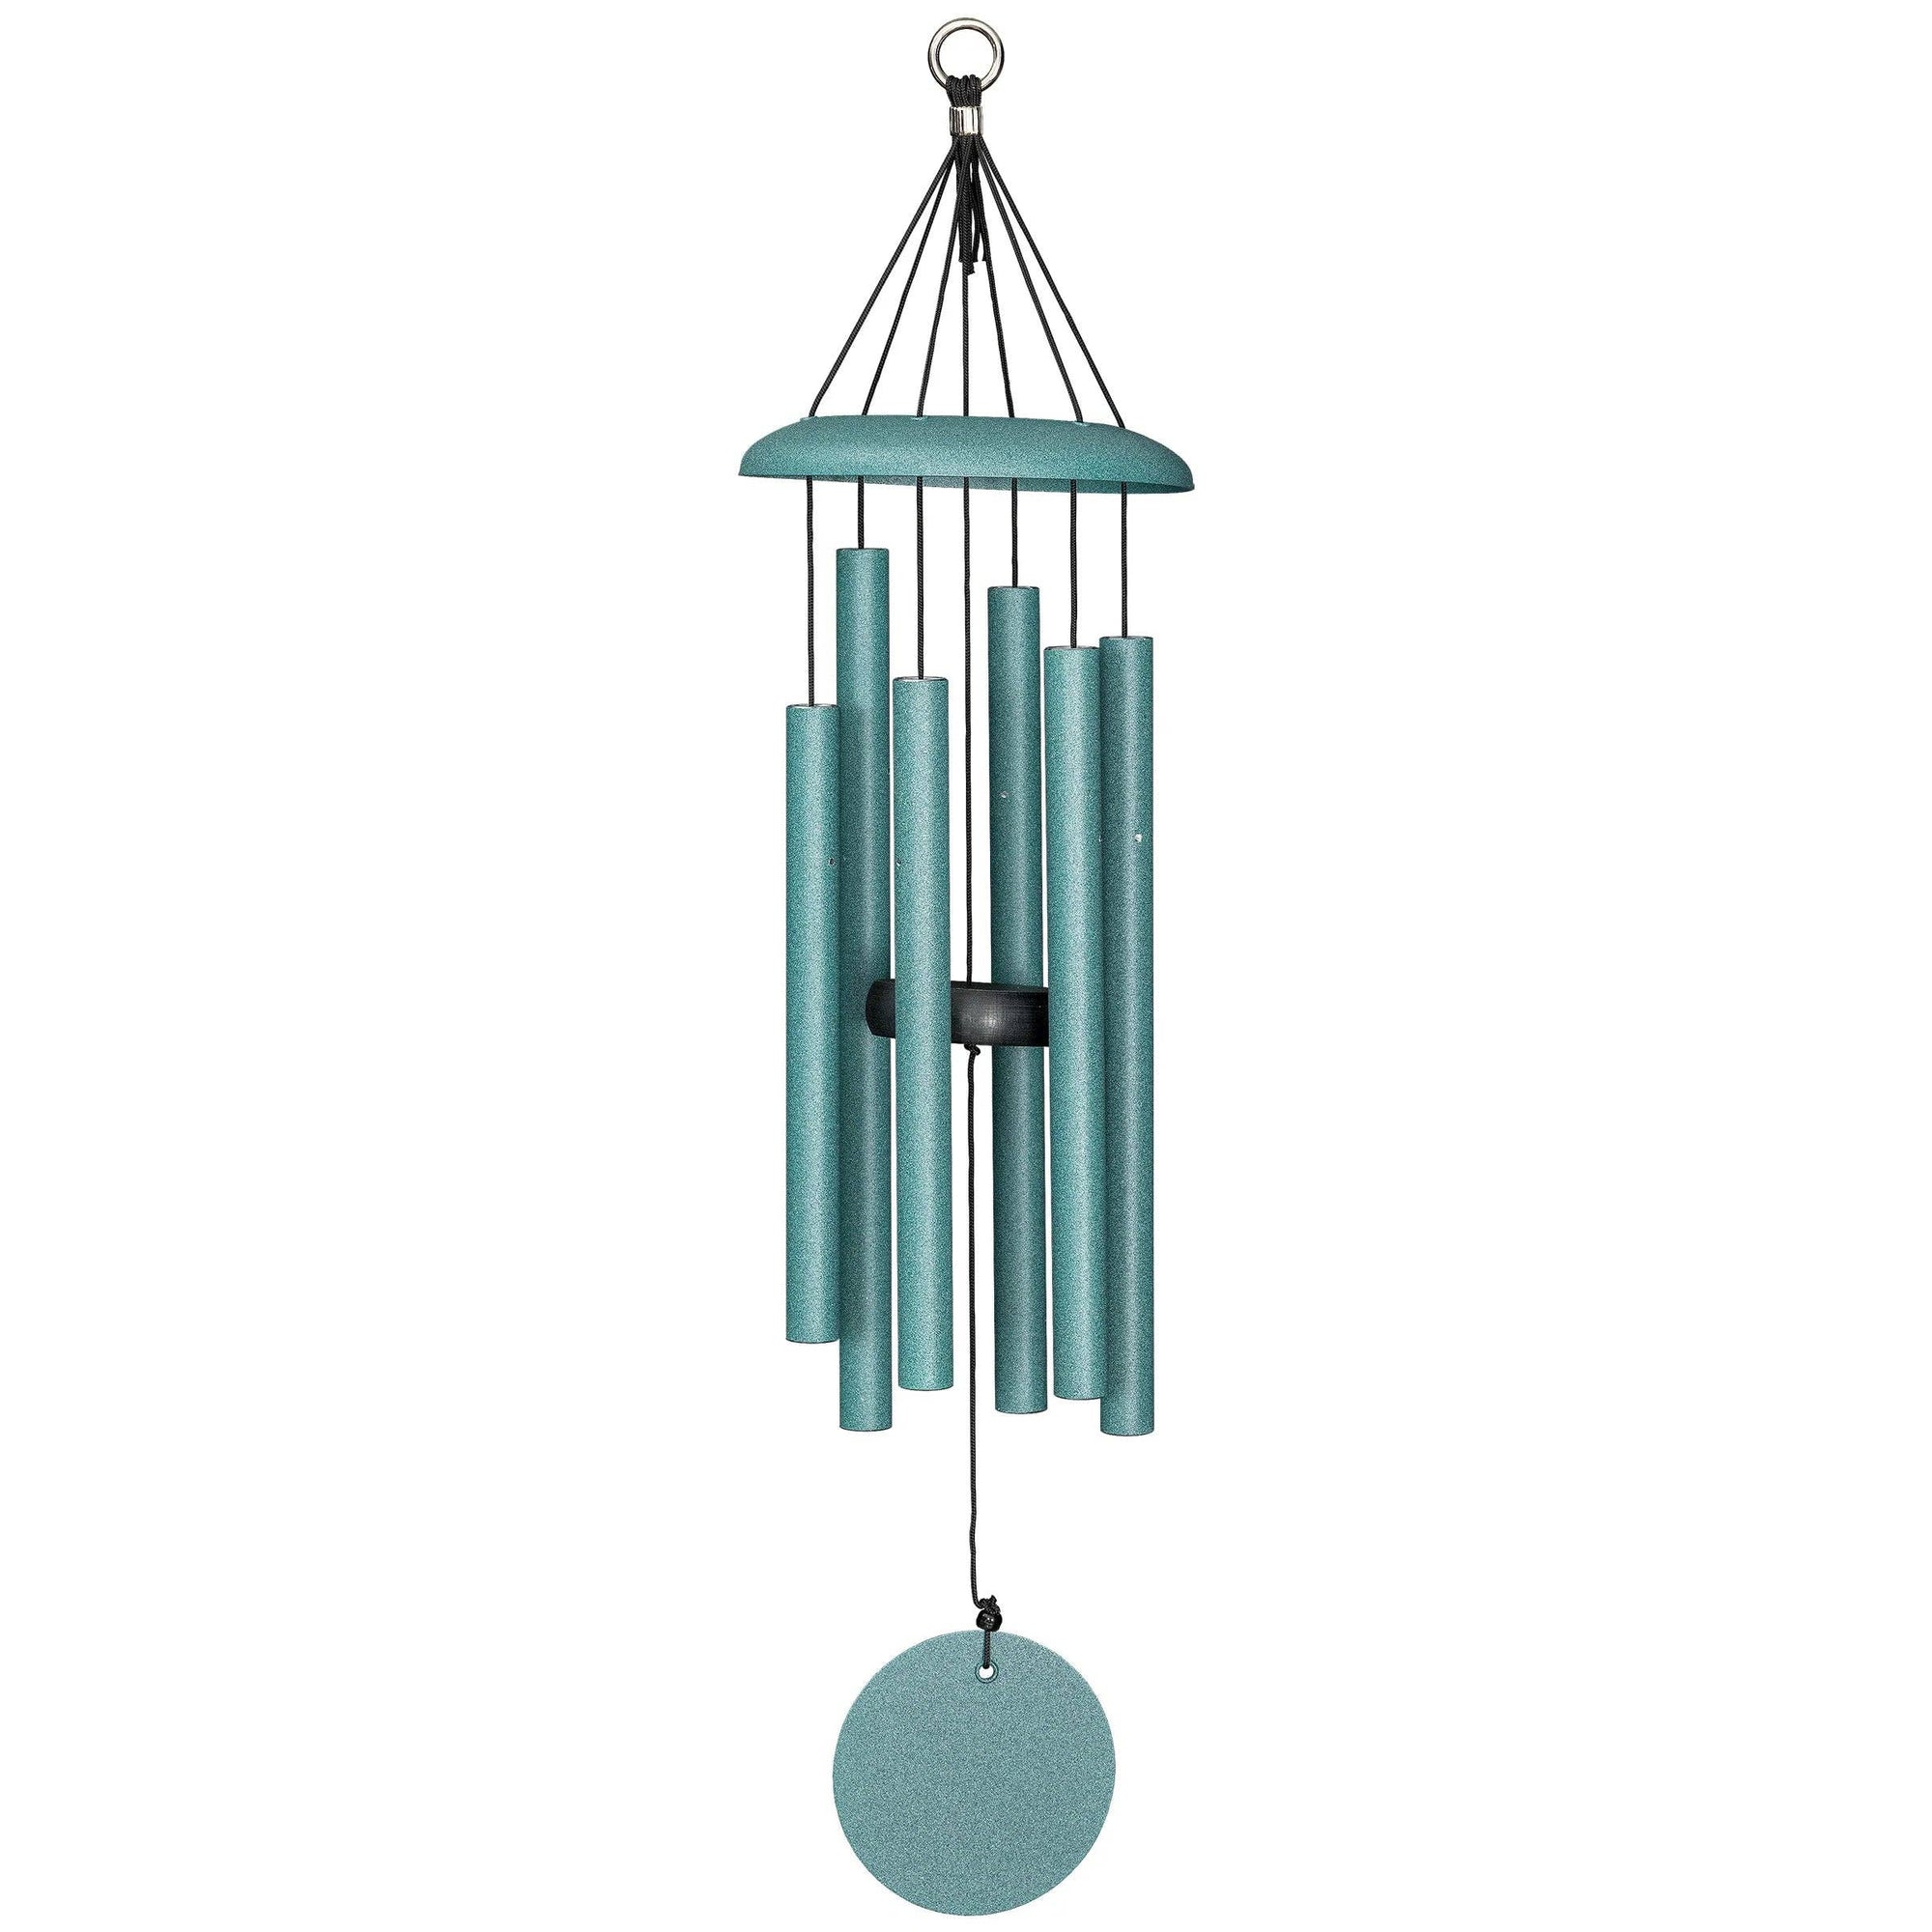 A budget-friendly 27" Windchime Corinthian Bells® adds décor to any space with its compact size, hanging gracefully on a white background.